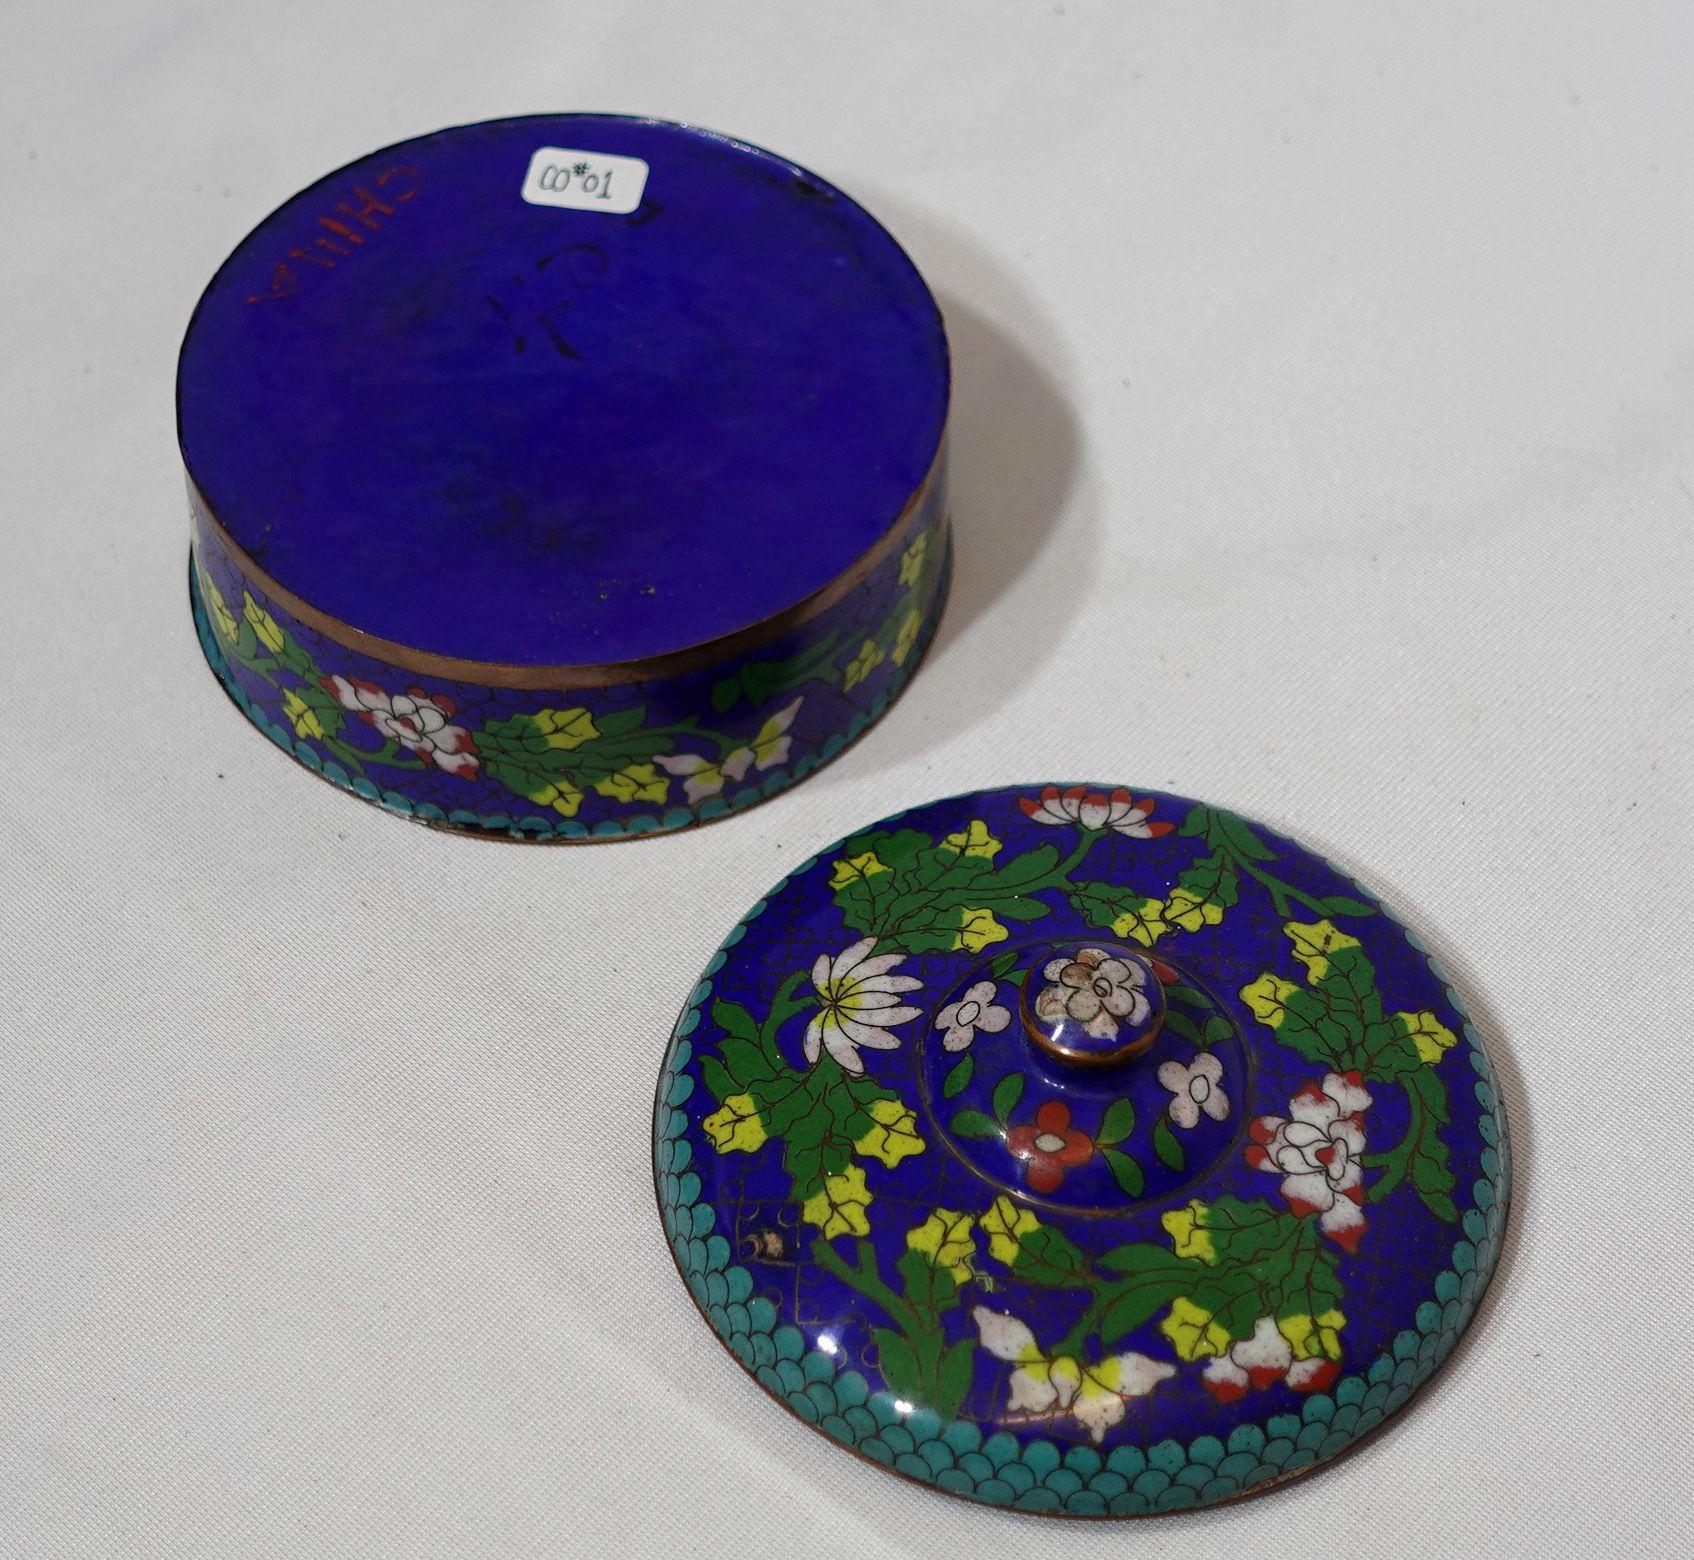 Antique Chinese Cloisonné Enamel Round Lidded Box 19th Century CO#01 For Sale 2